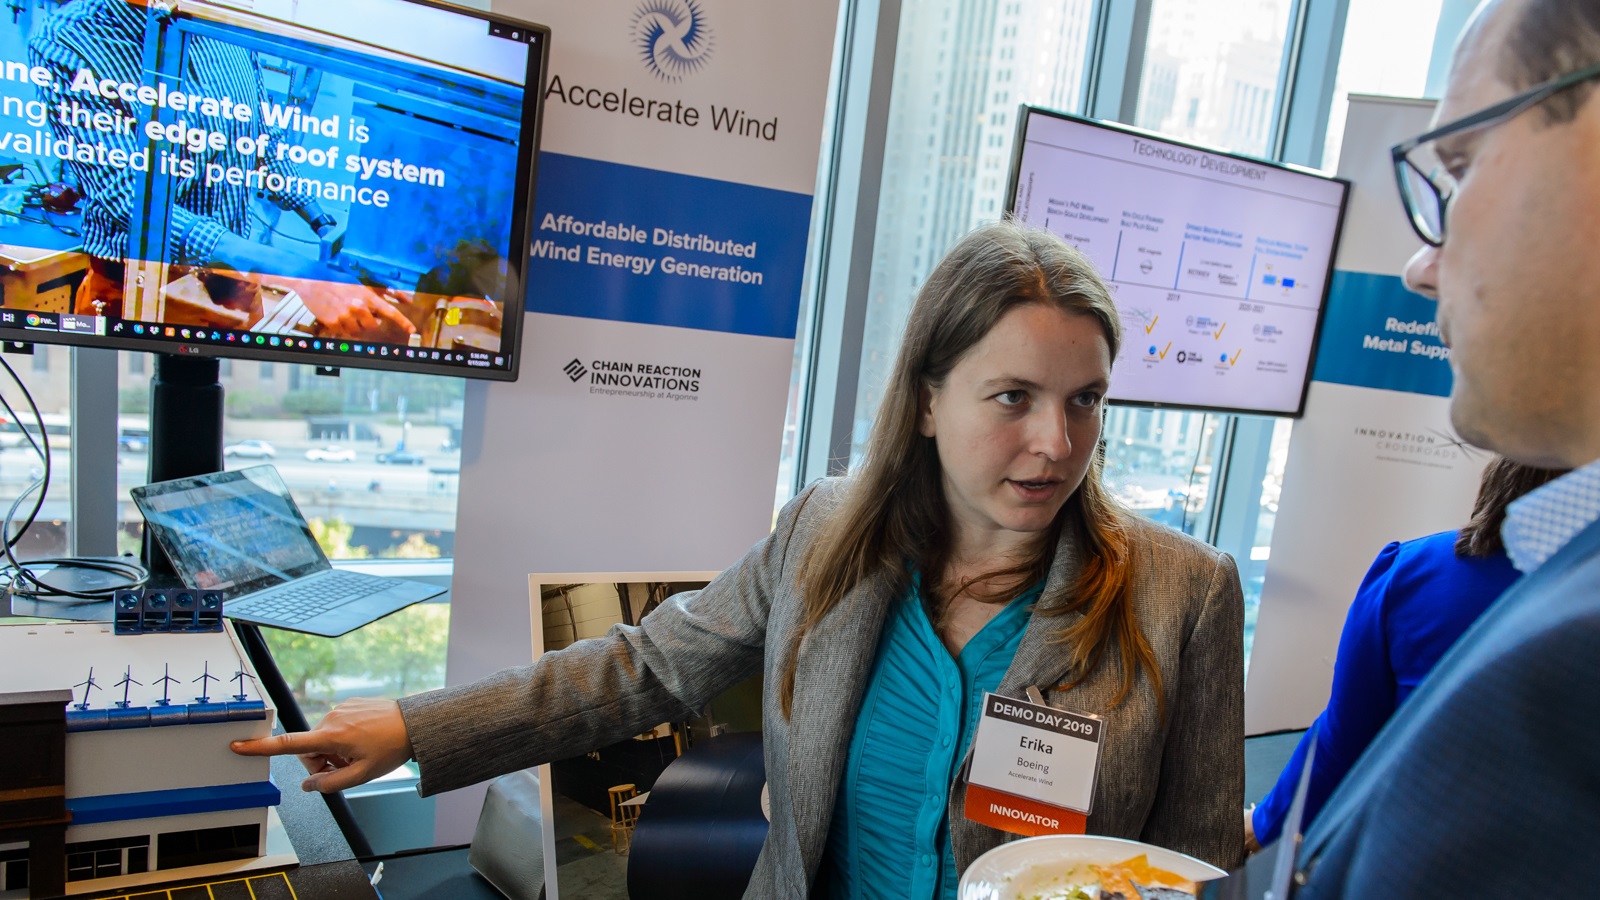 Erika Boeing, CEO of Accelerate Wind, shows her distributed wind rooftop-based generation platform at Demo Day. (Image by Argonne National Laboratory.)